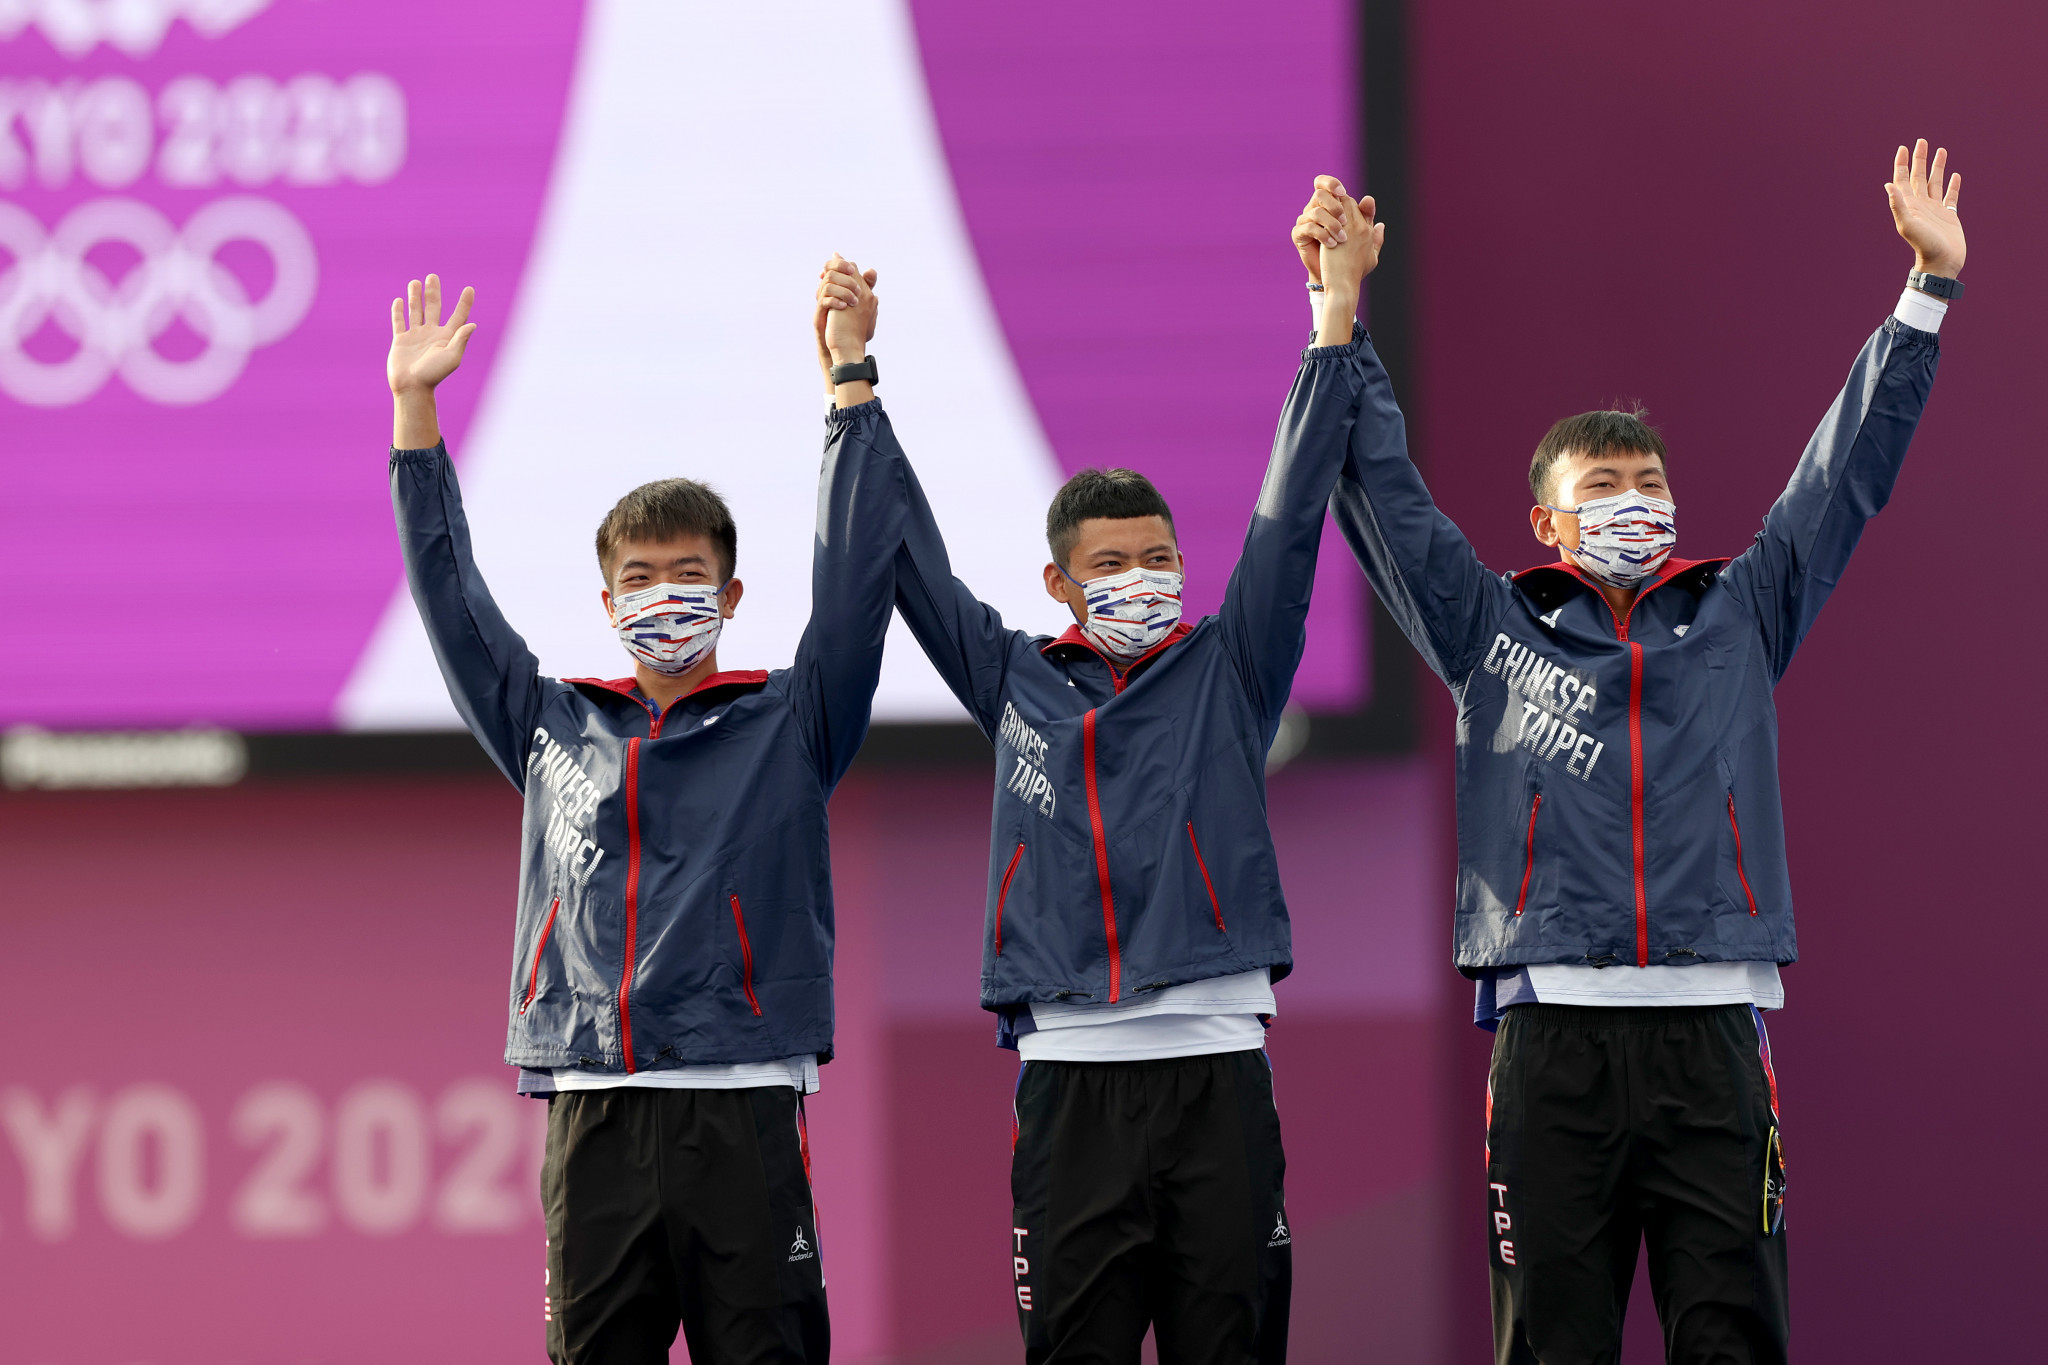 Chinese Taipei beat China, Australia and The Netherlands en route to a silver medal which matches their best performance in the men's team event at the Olympics ©Getty Images